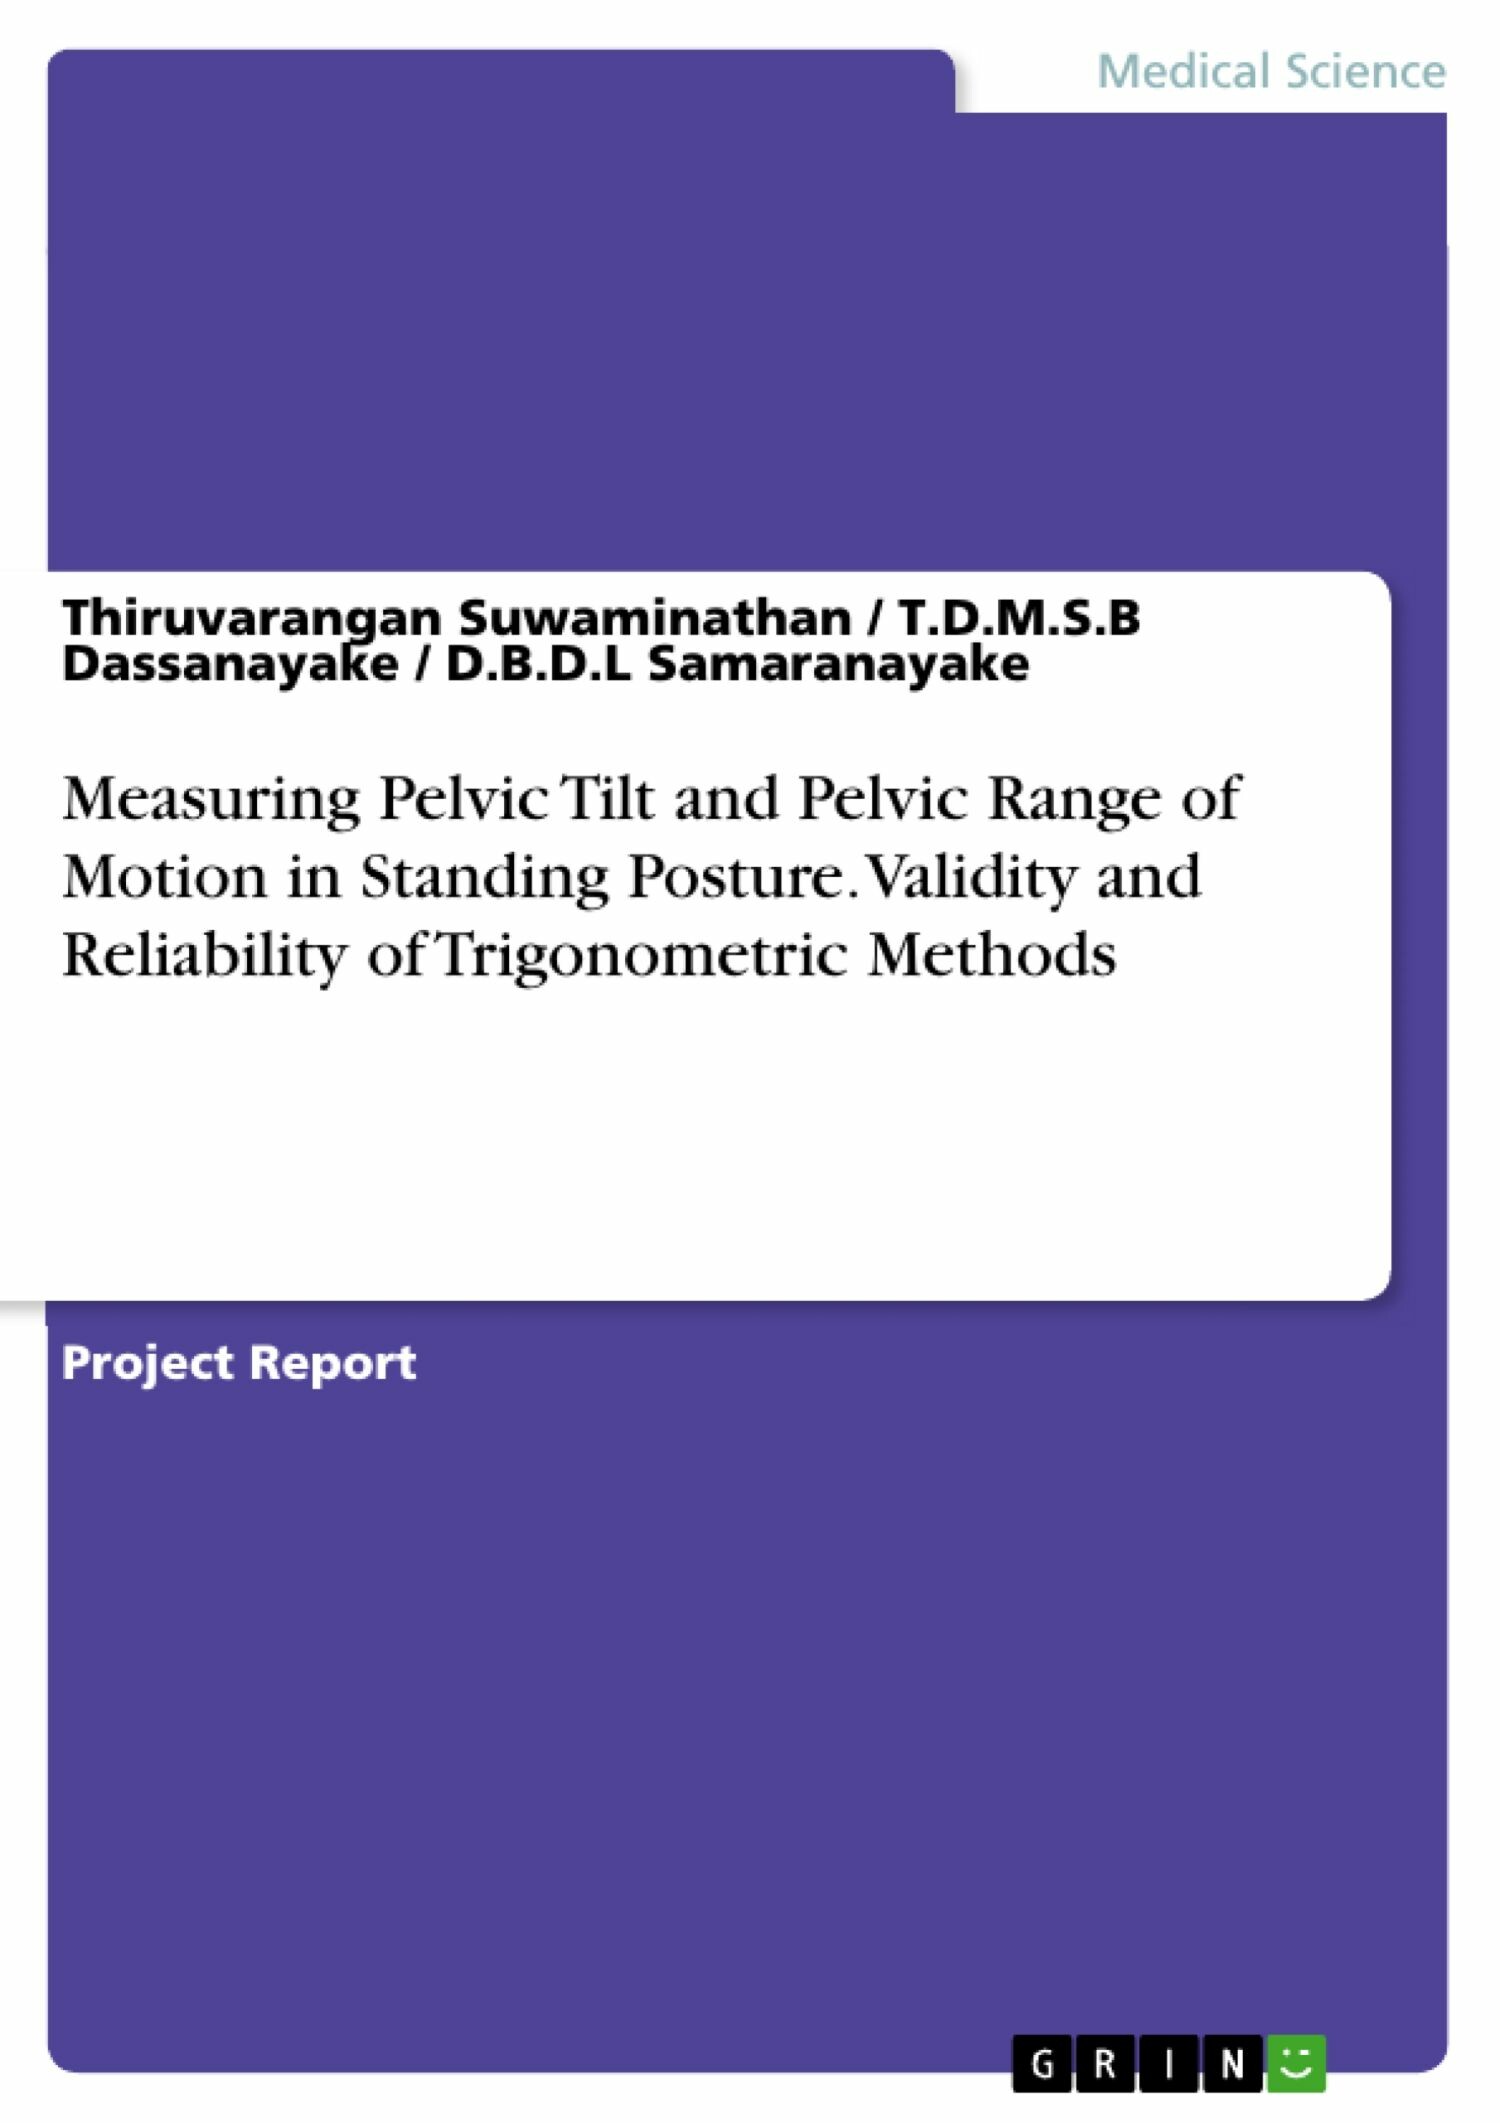 Measuring Pelvic Tilt and Pelvic Range of Motion in Standing Posture. Validity and Reliability of Trigonometric Methods